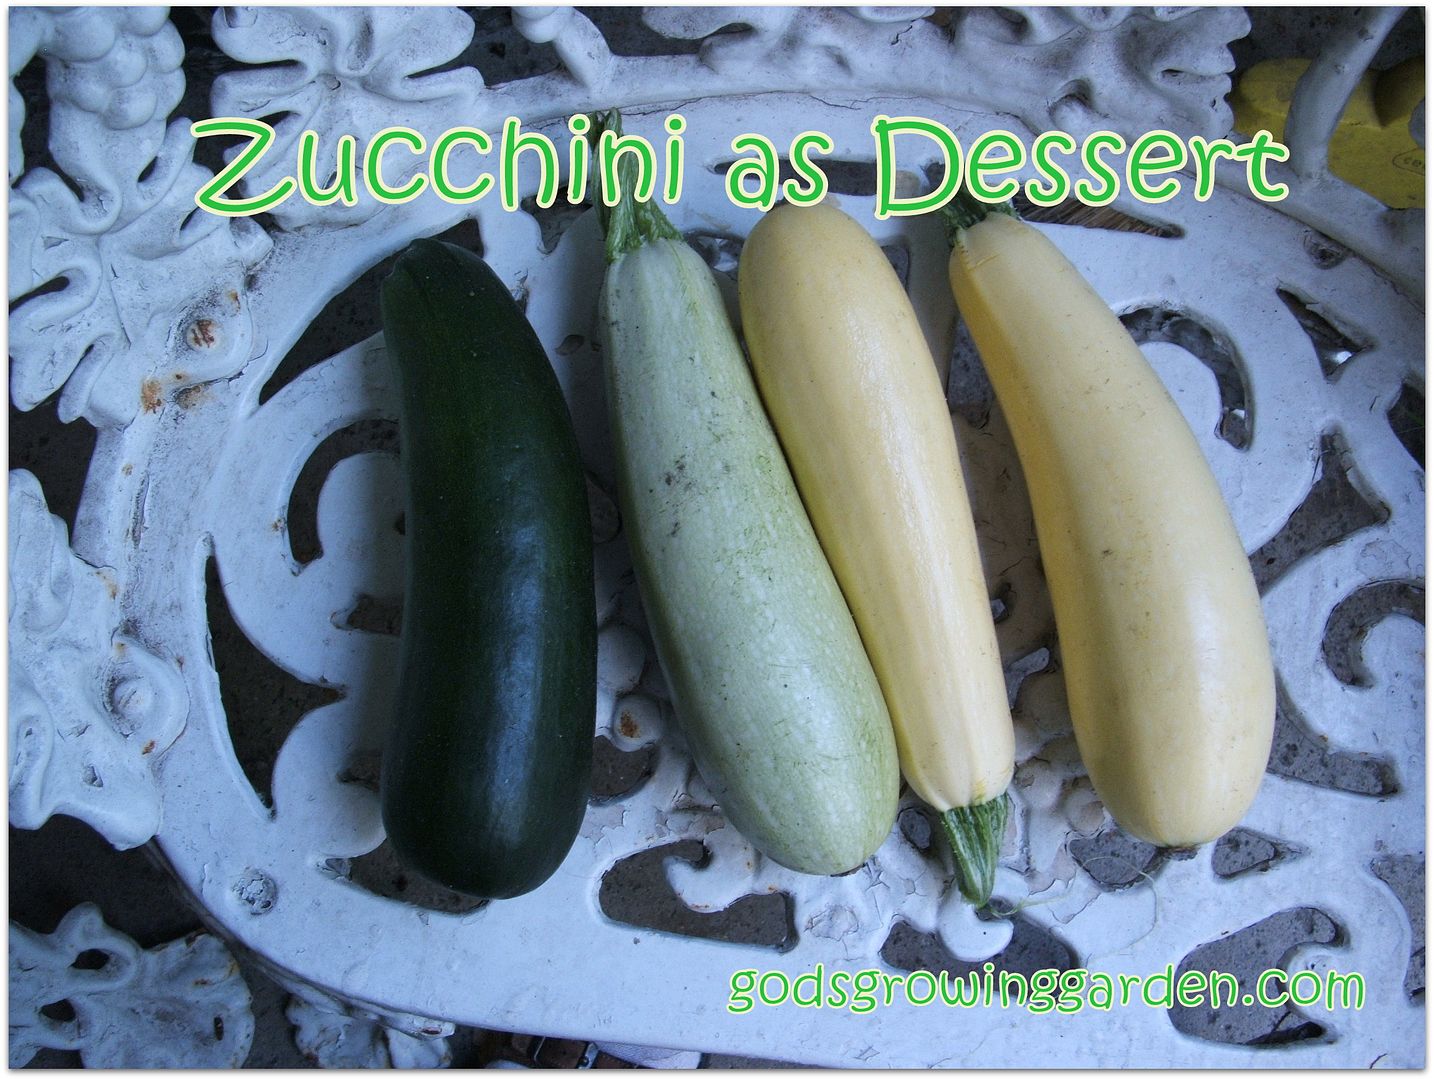 Zucchini by Angie Ouellette-Tower for godsgrowinggarden.com photo 001_zps90e32ca0.jpg